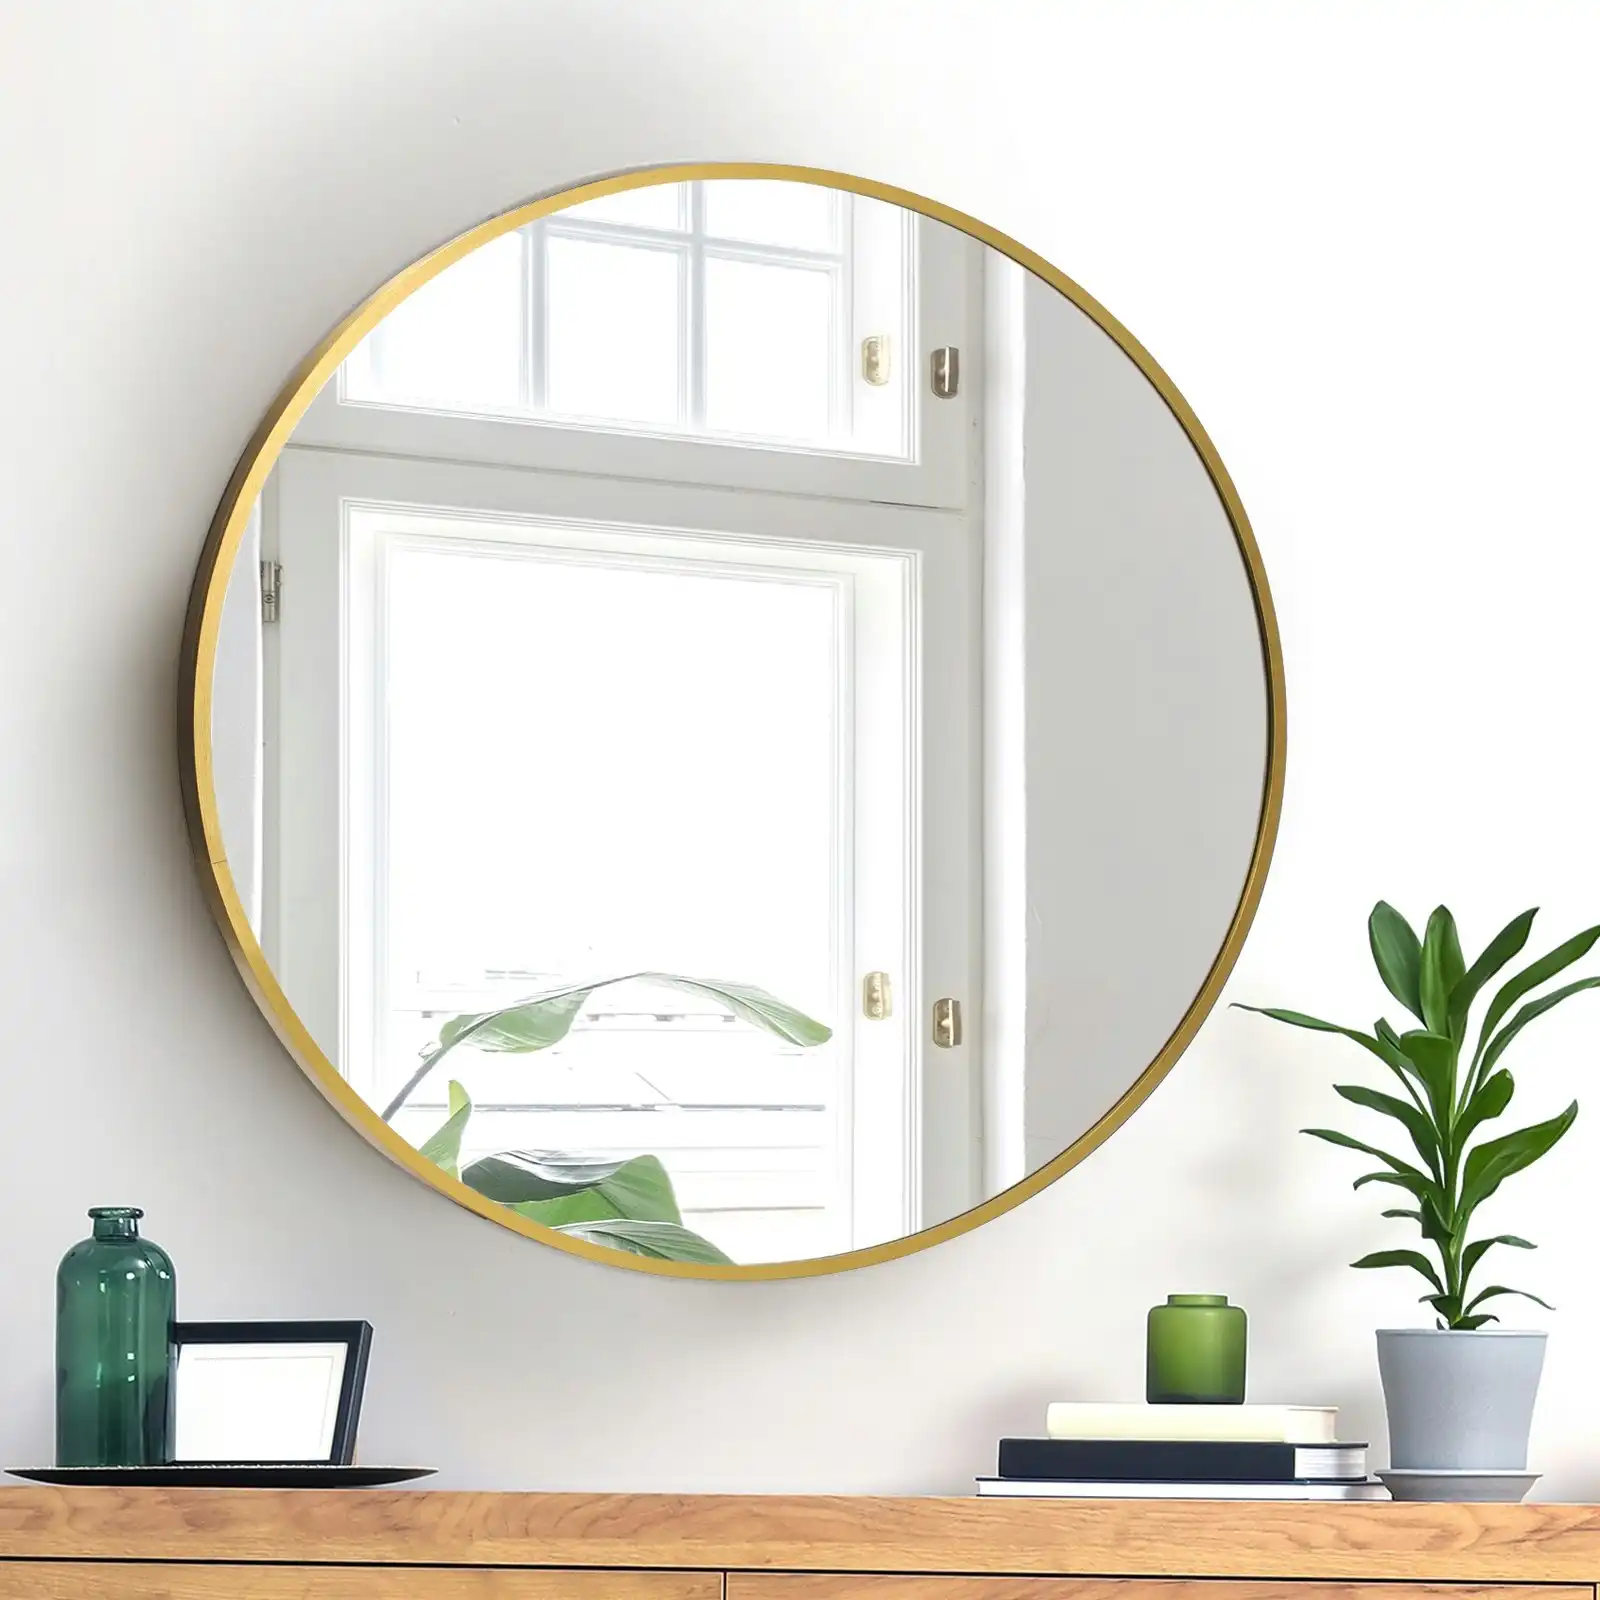 Oikiture 60cm Wall Mirrors Round Makeup Mirror Home Decor Gold Living Room